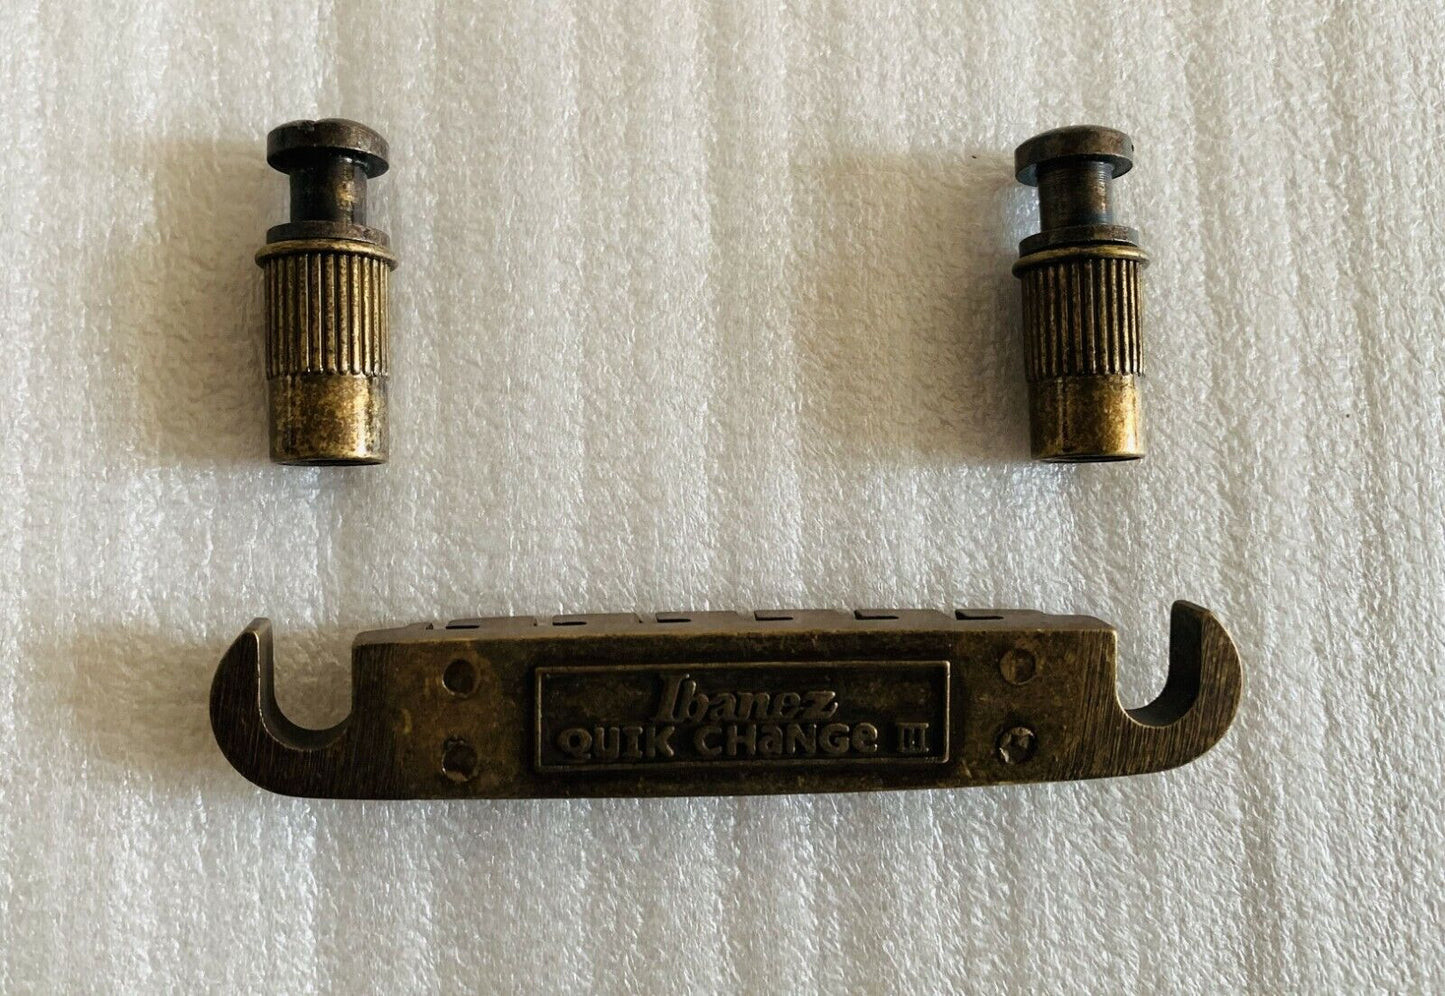 Antique Gold Ibanez Guitar QuickChange III Tailpiece Fit Ibanez AGS,ART,AX,AM,AS